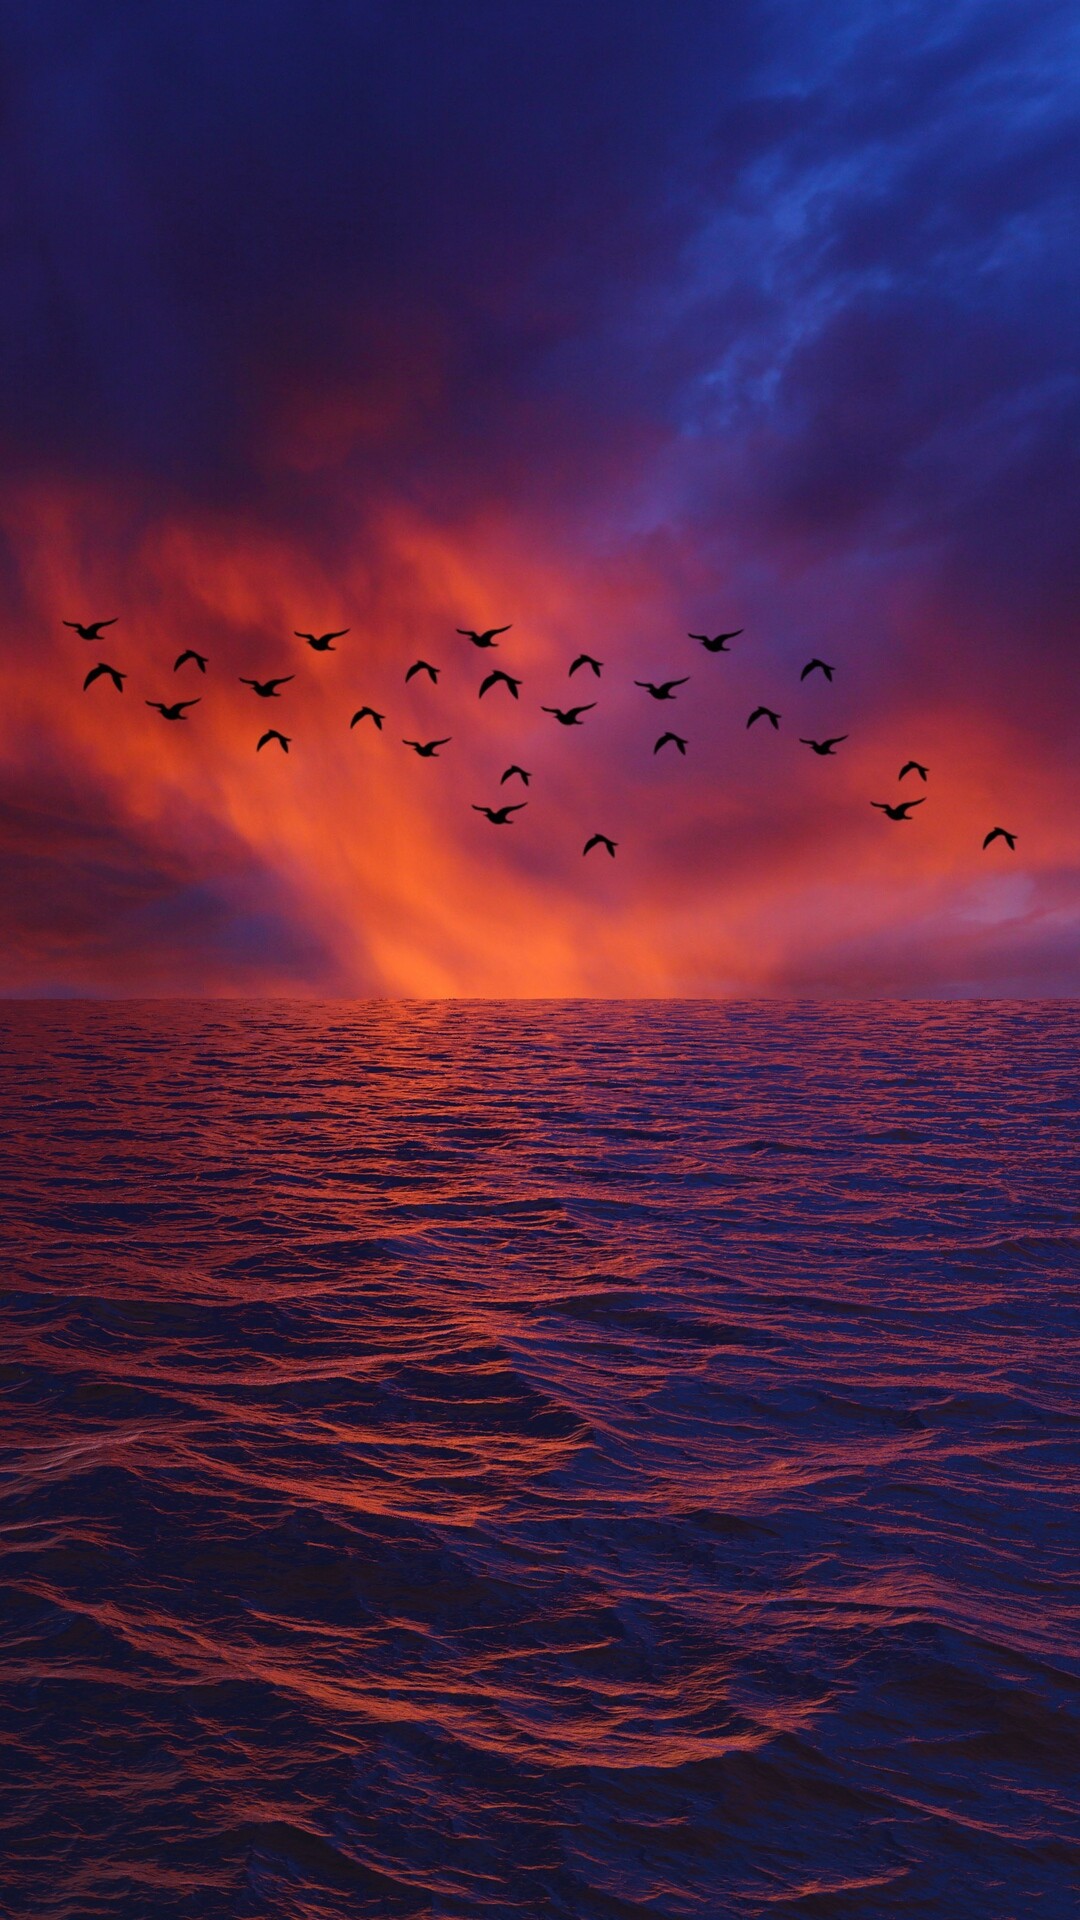 Bird: A flock, A gathering of individual birds to forage or travel collectively. 1080x1920 Full HD Wallpaper.